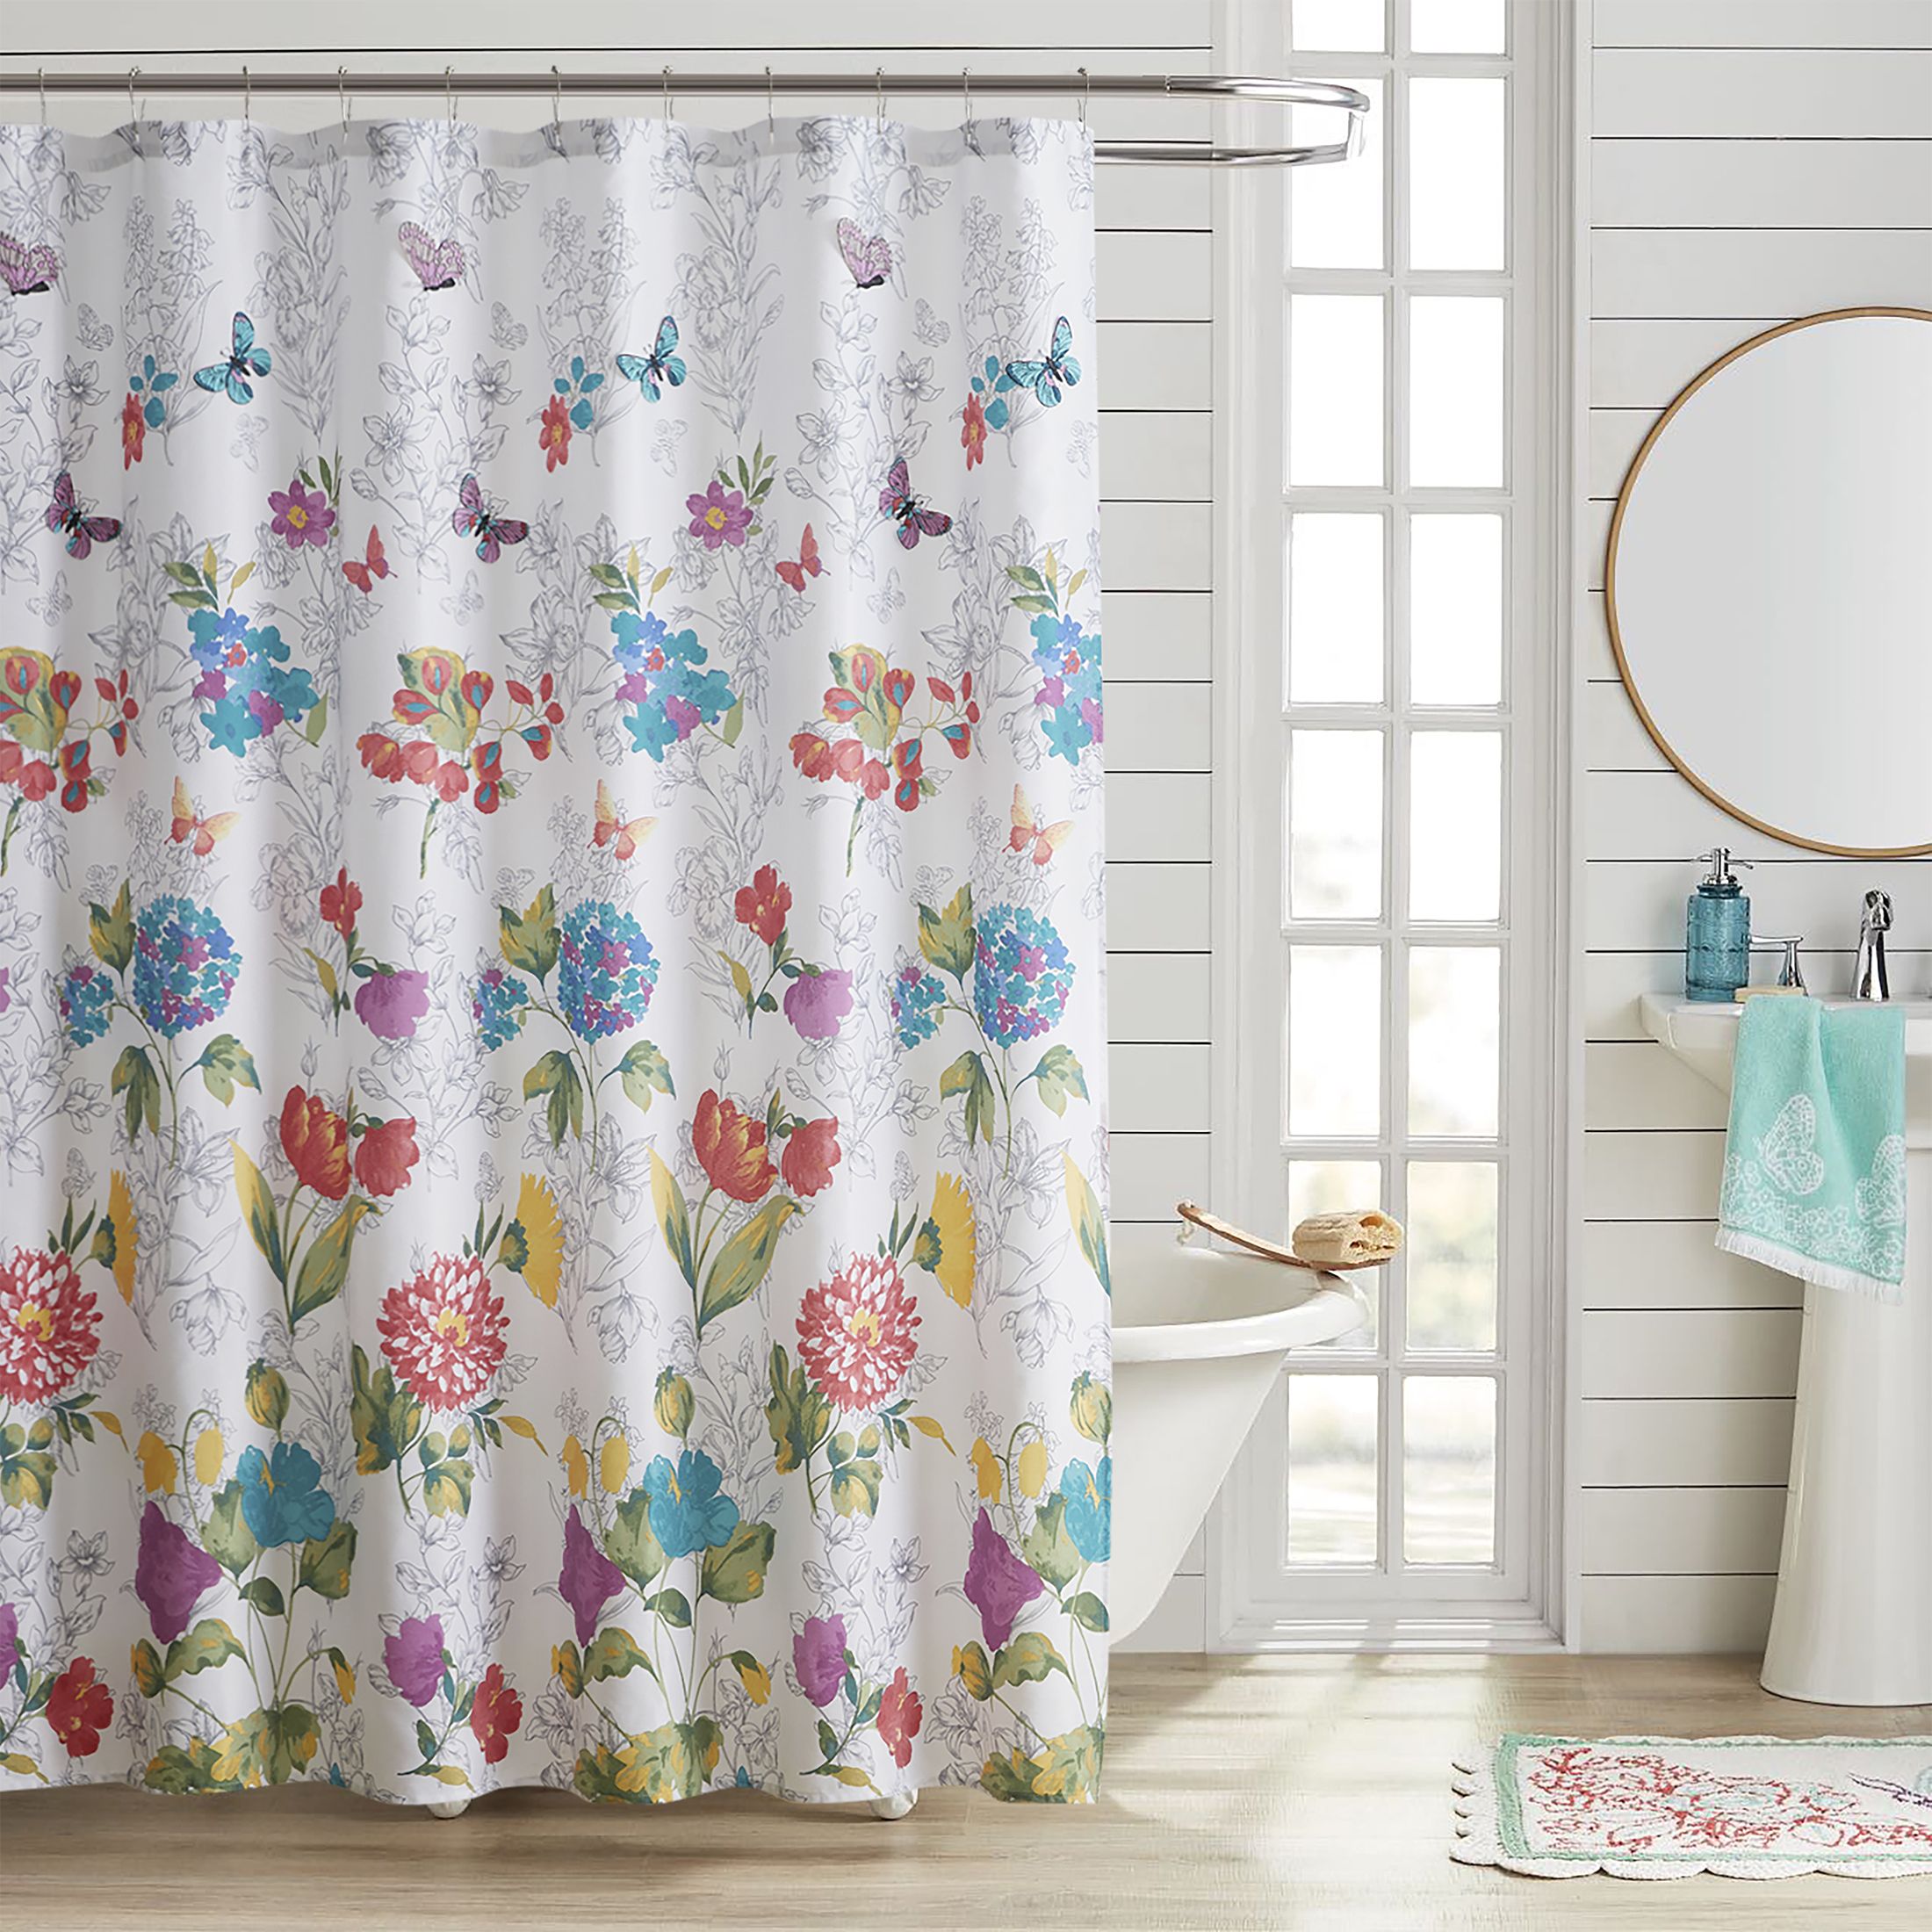 The Pioneer Woman Blooming Bouquet Multicolor Shower Curtain